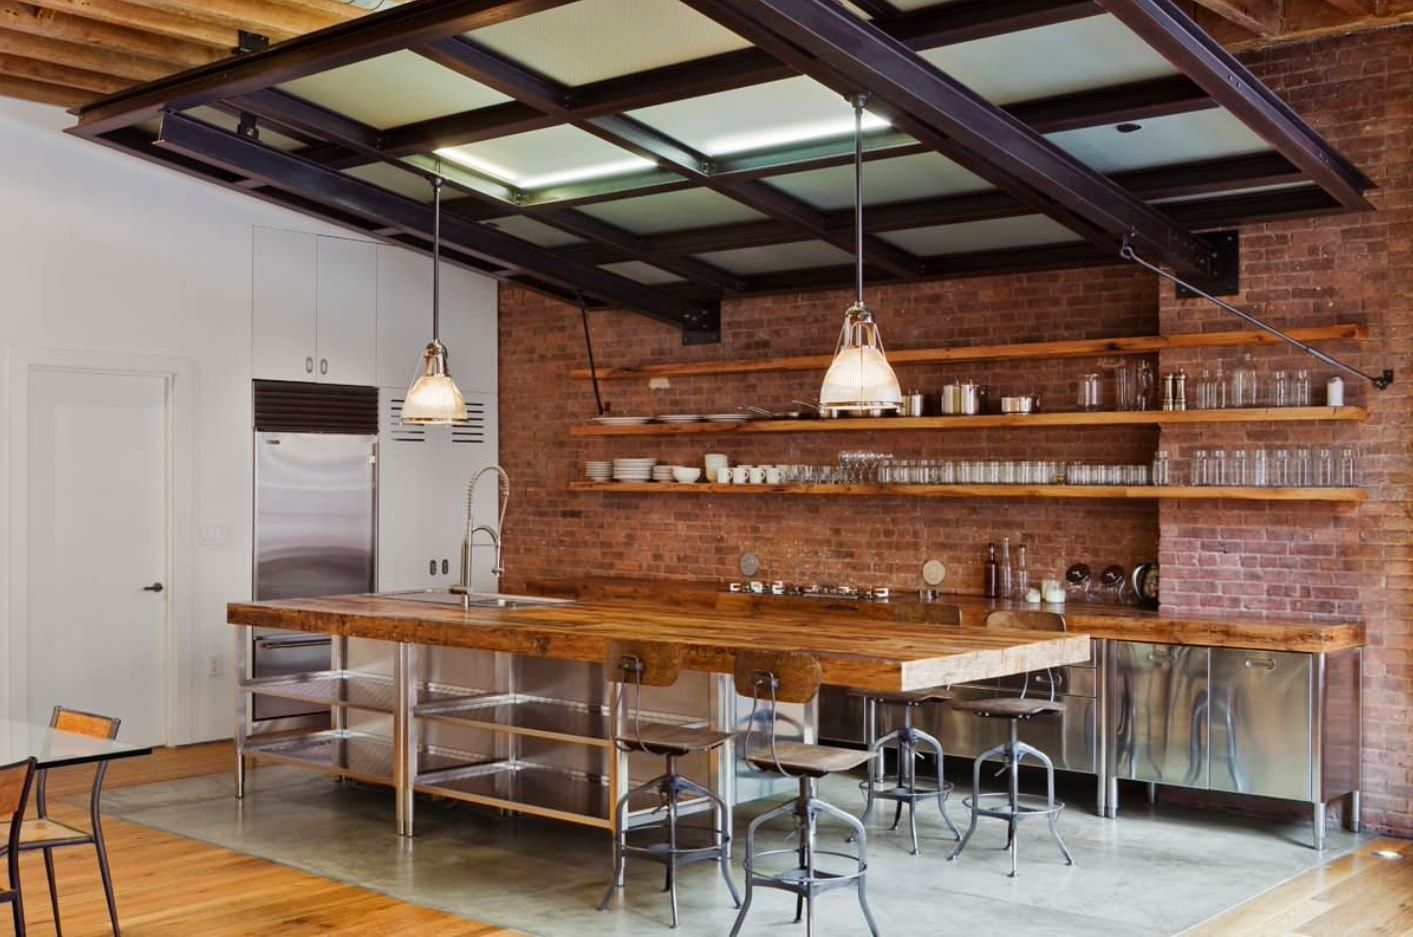 Industrial styled kitchen with metal lamps